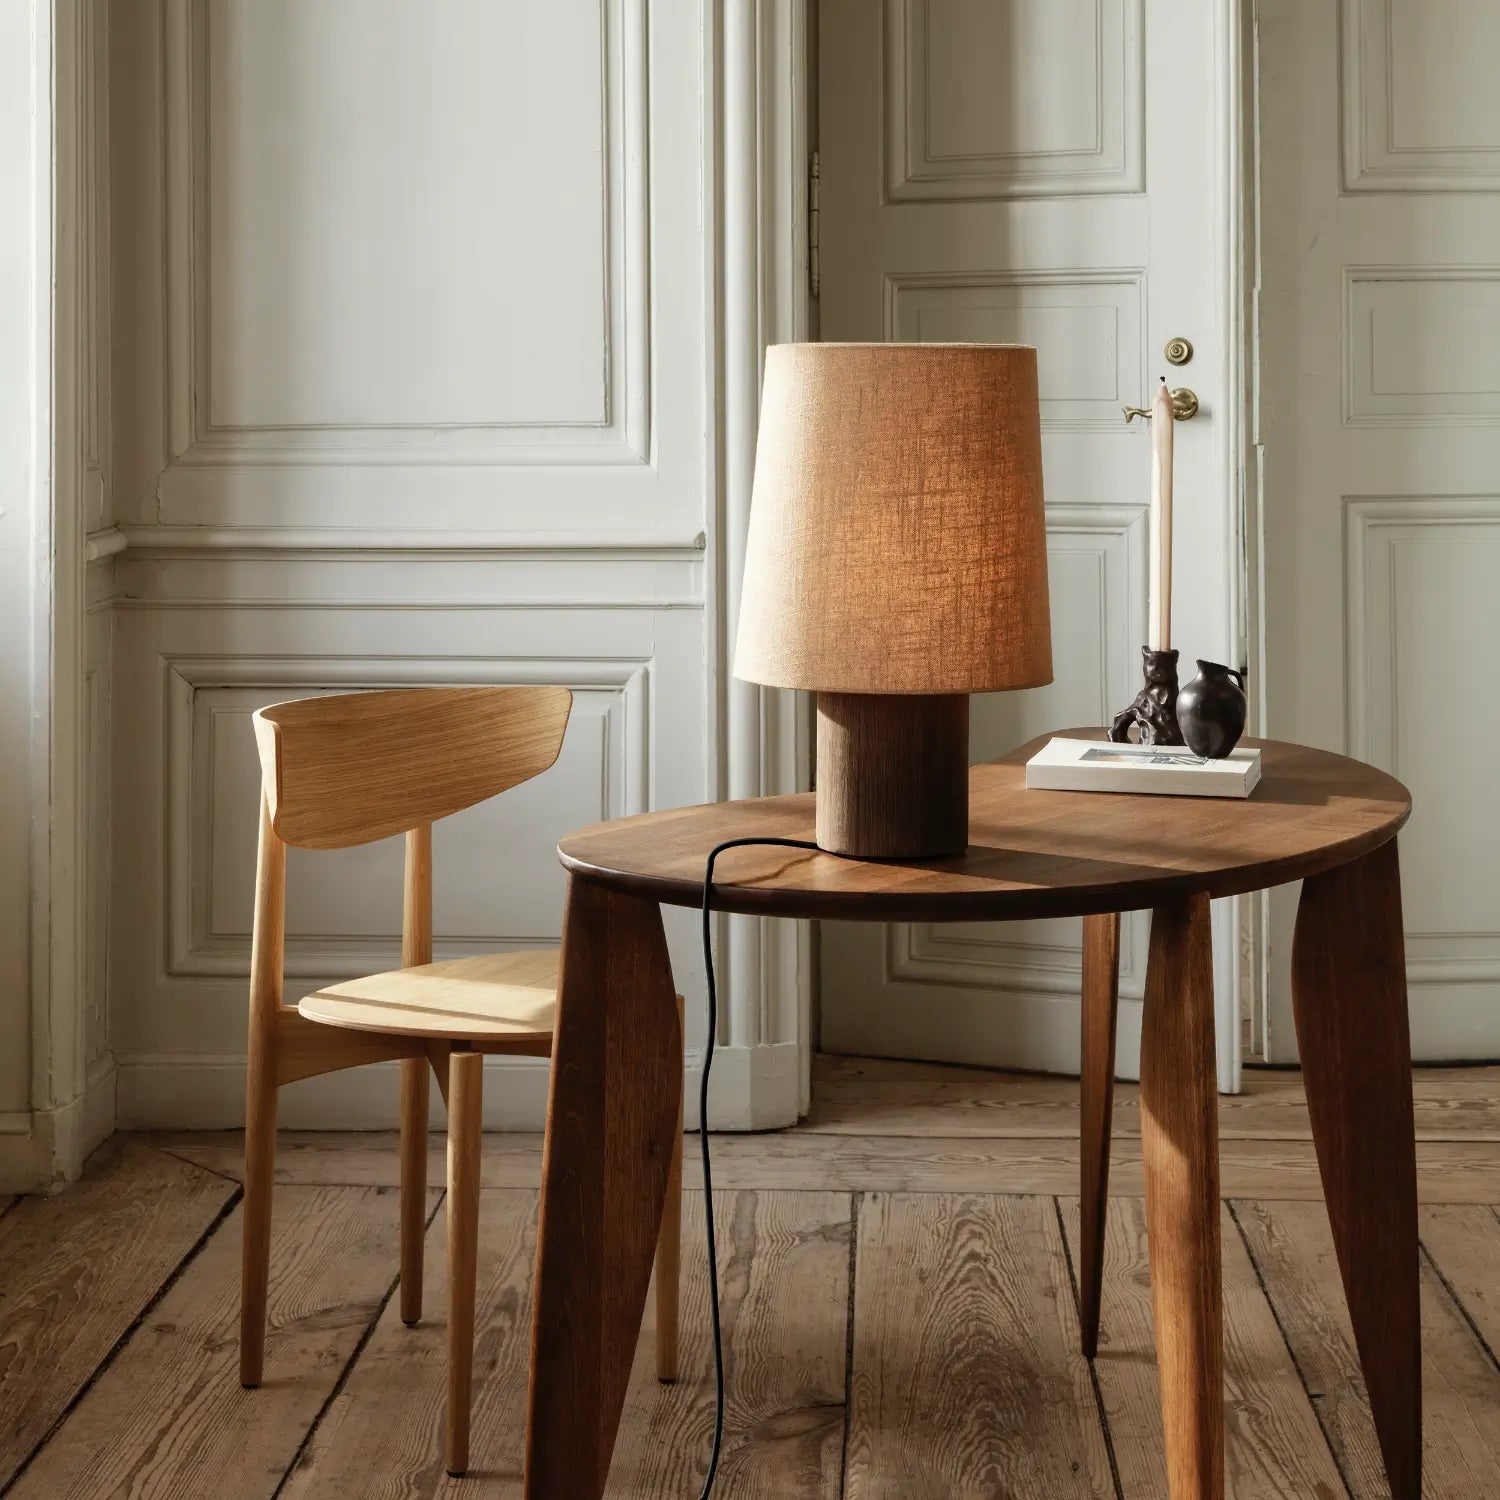 Ferm Living Herman Dining Chair - Wood - KANSO